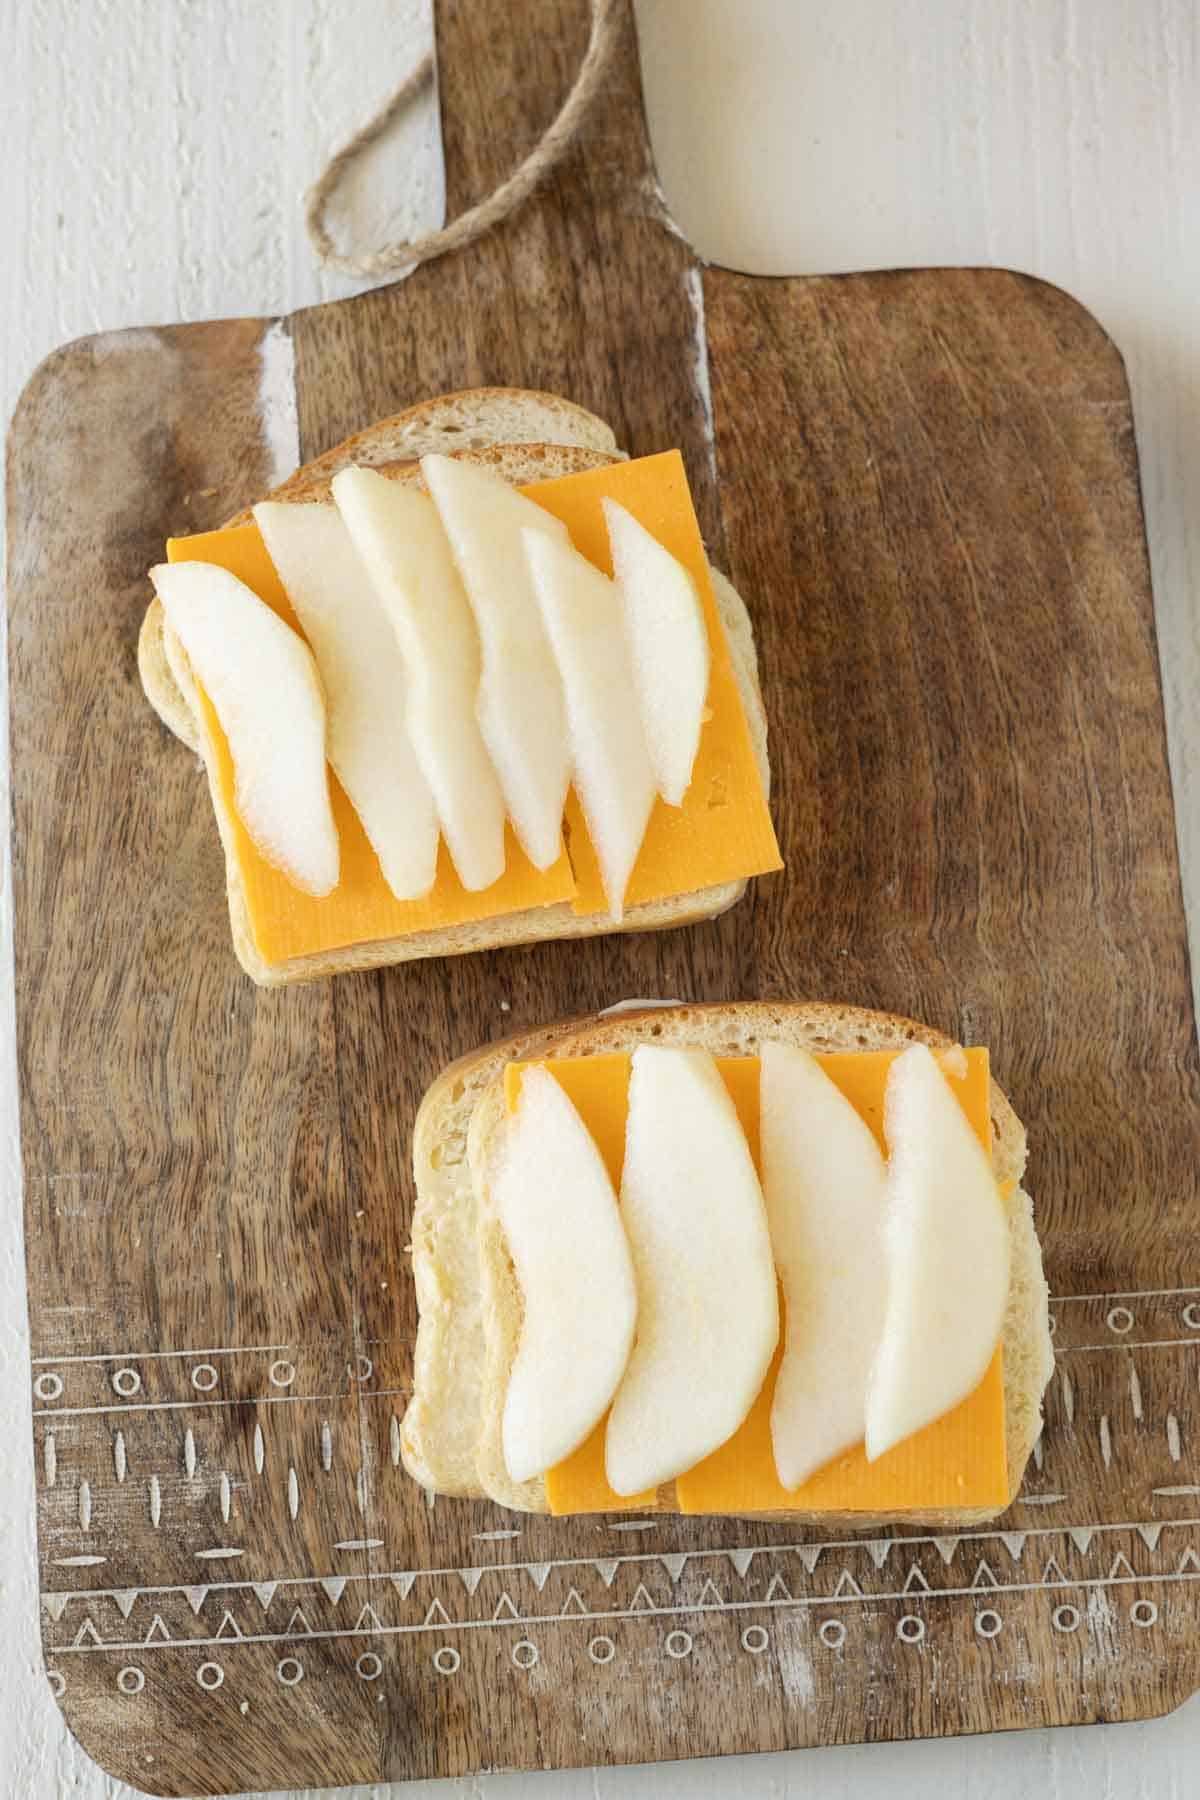 A slice of bread with cheddar cheese and sliced fresh pears.